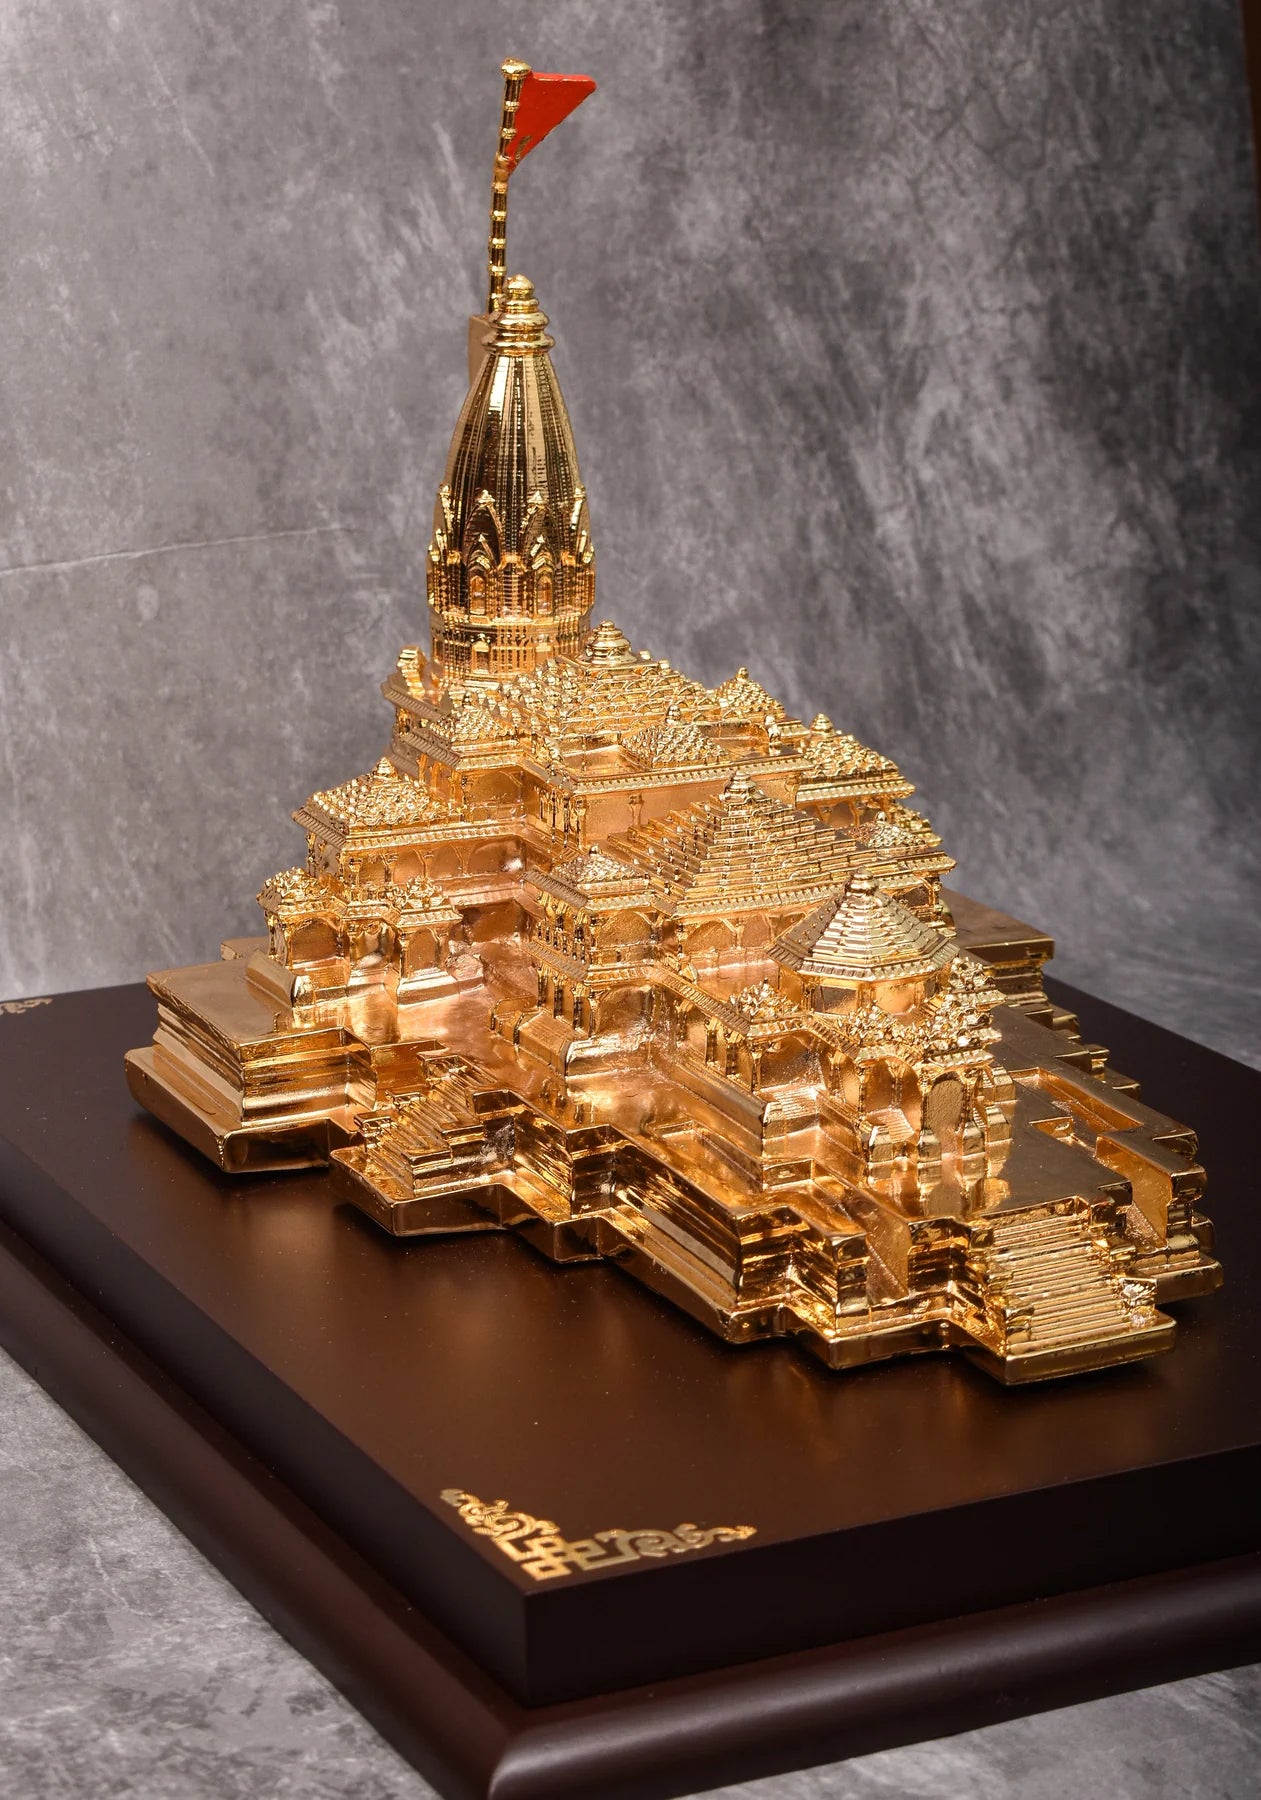 Ayodhya Ram Mandir Statue in Solid Metal with Gold Tone Polish, Wooden base measured 13x10"